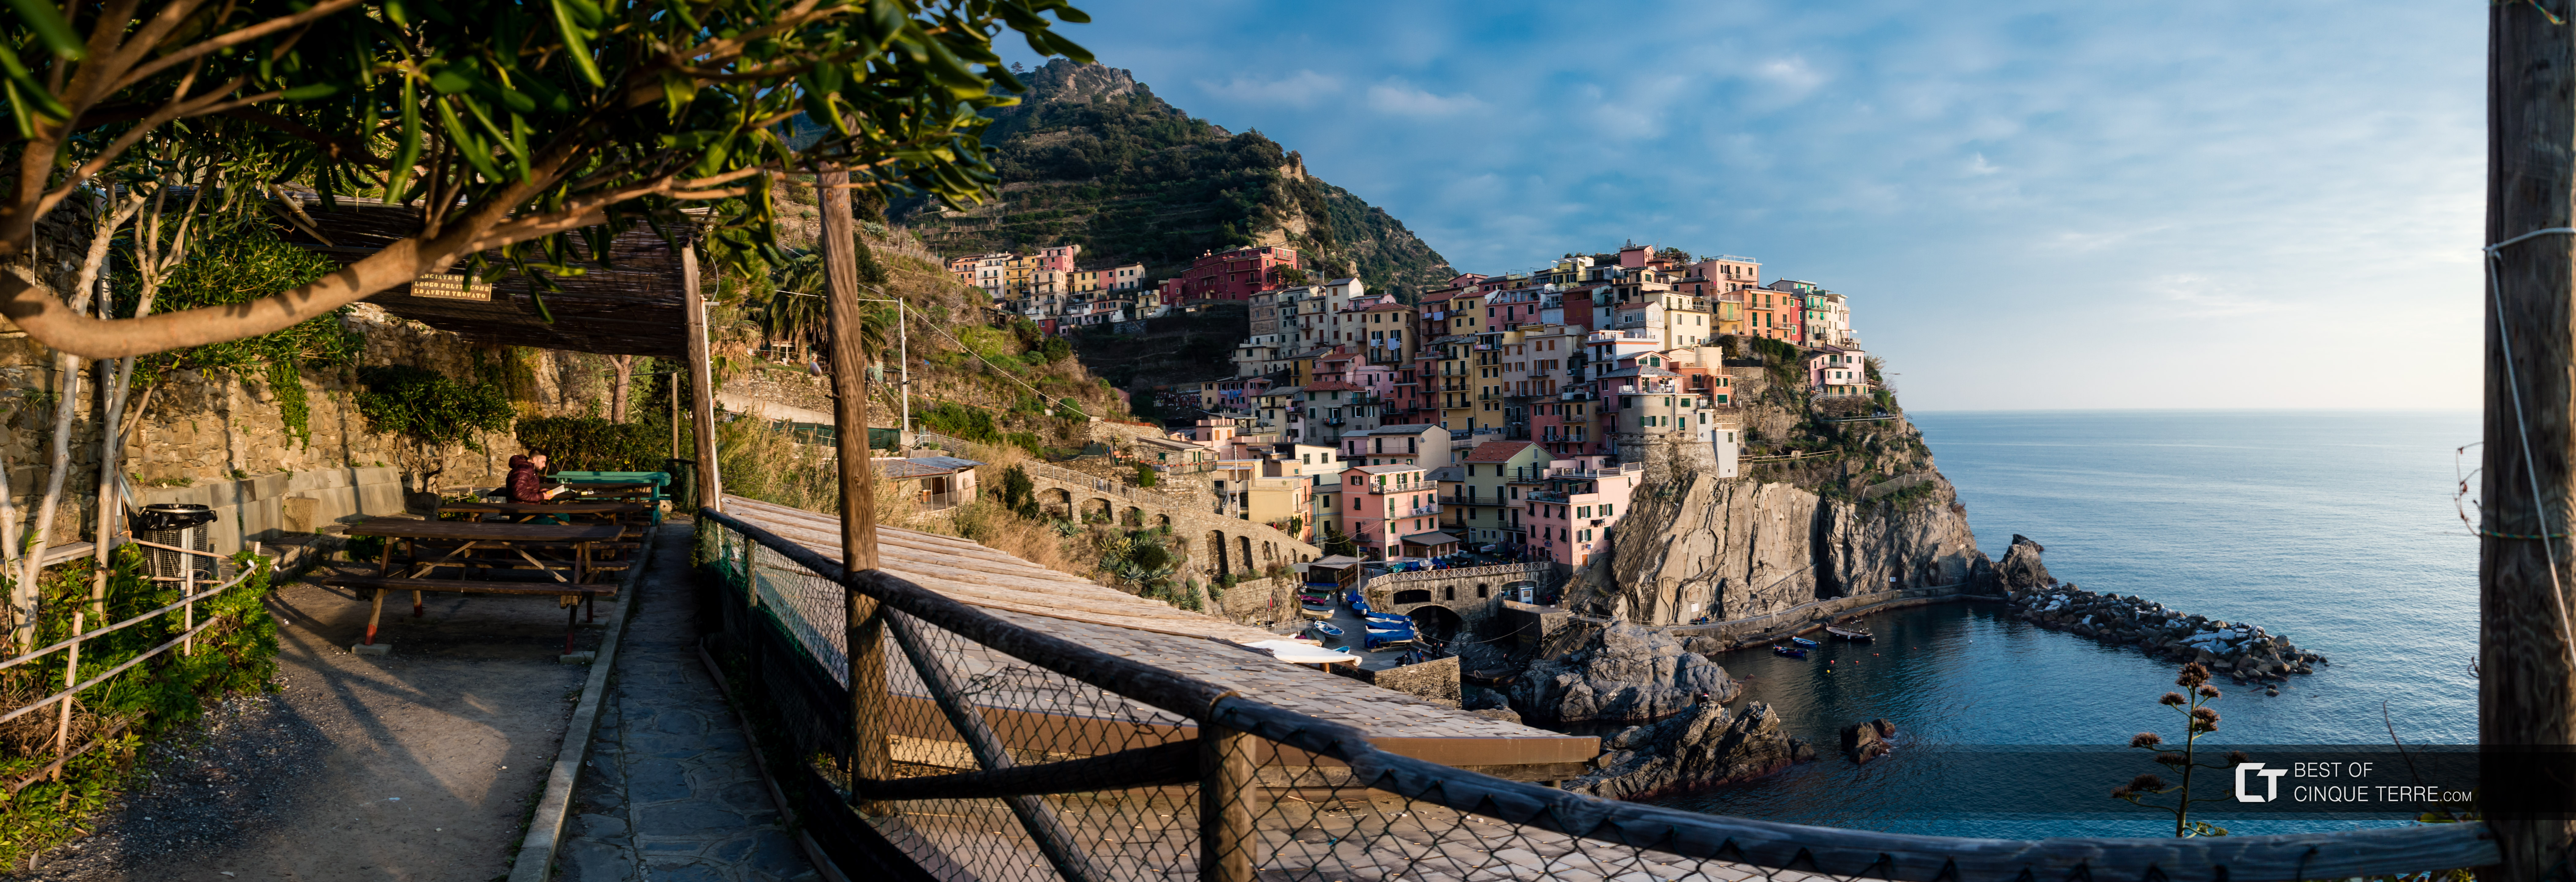 Overview of the recreation area and the village, Manarola, Cinque Terre, Italy